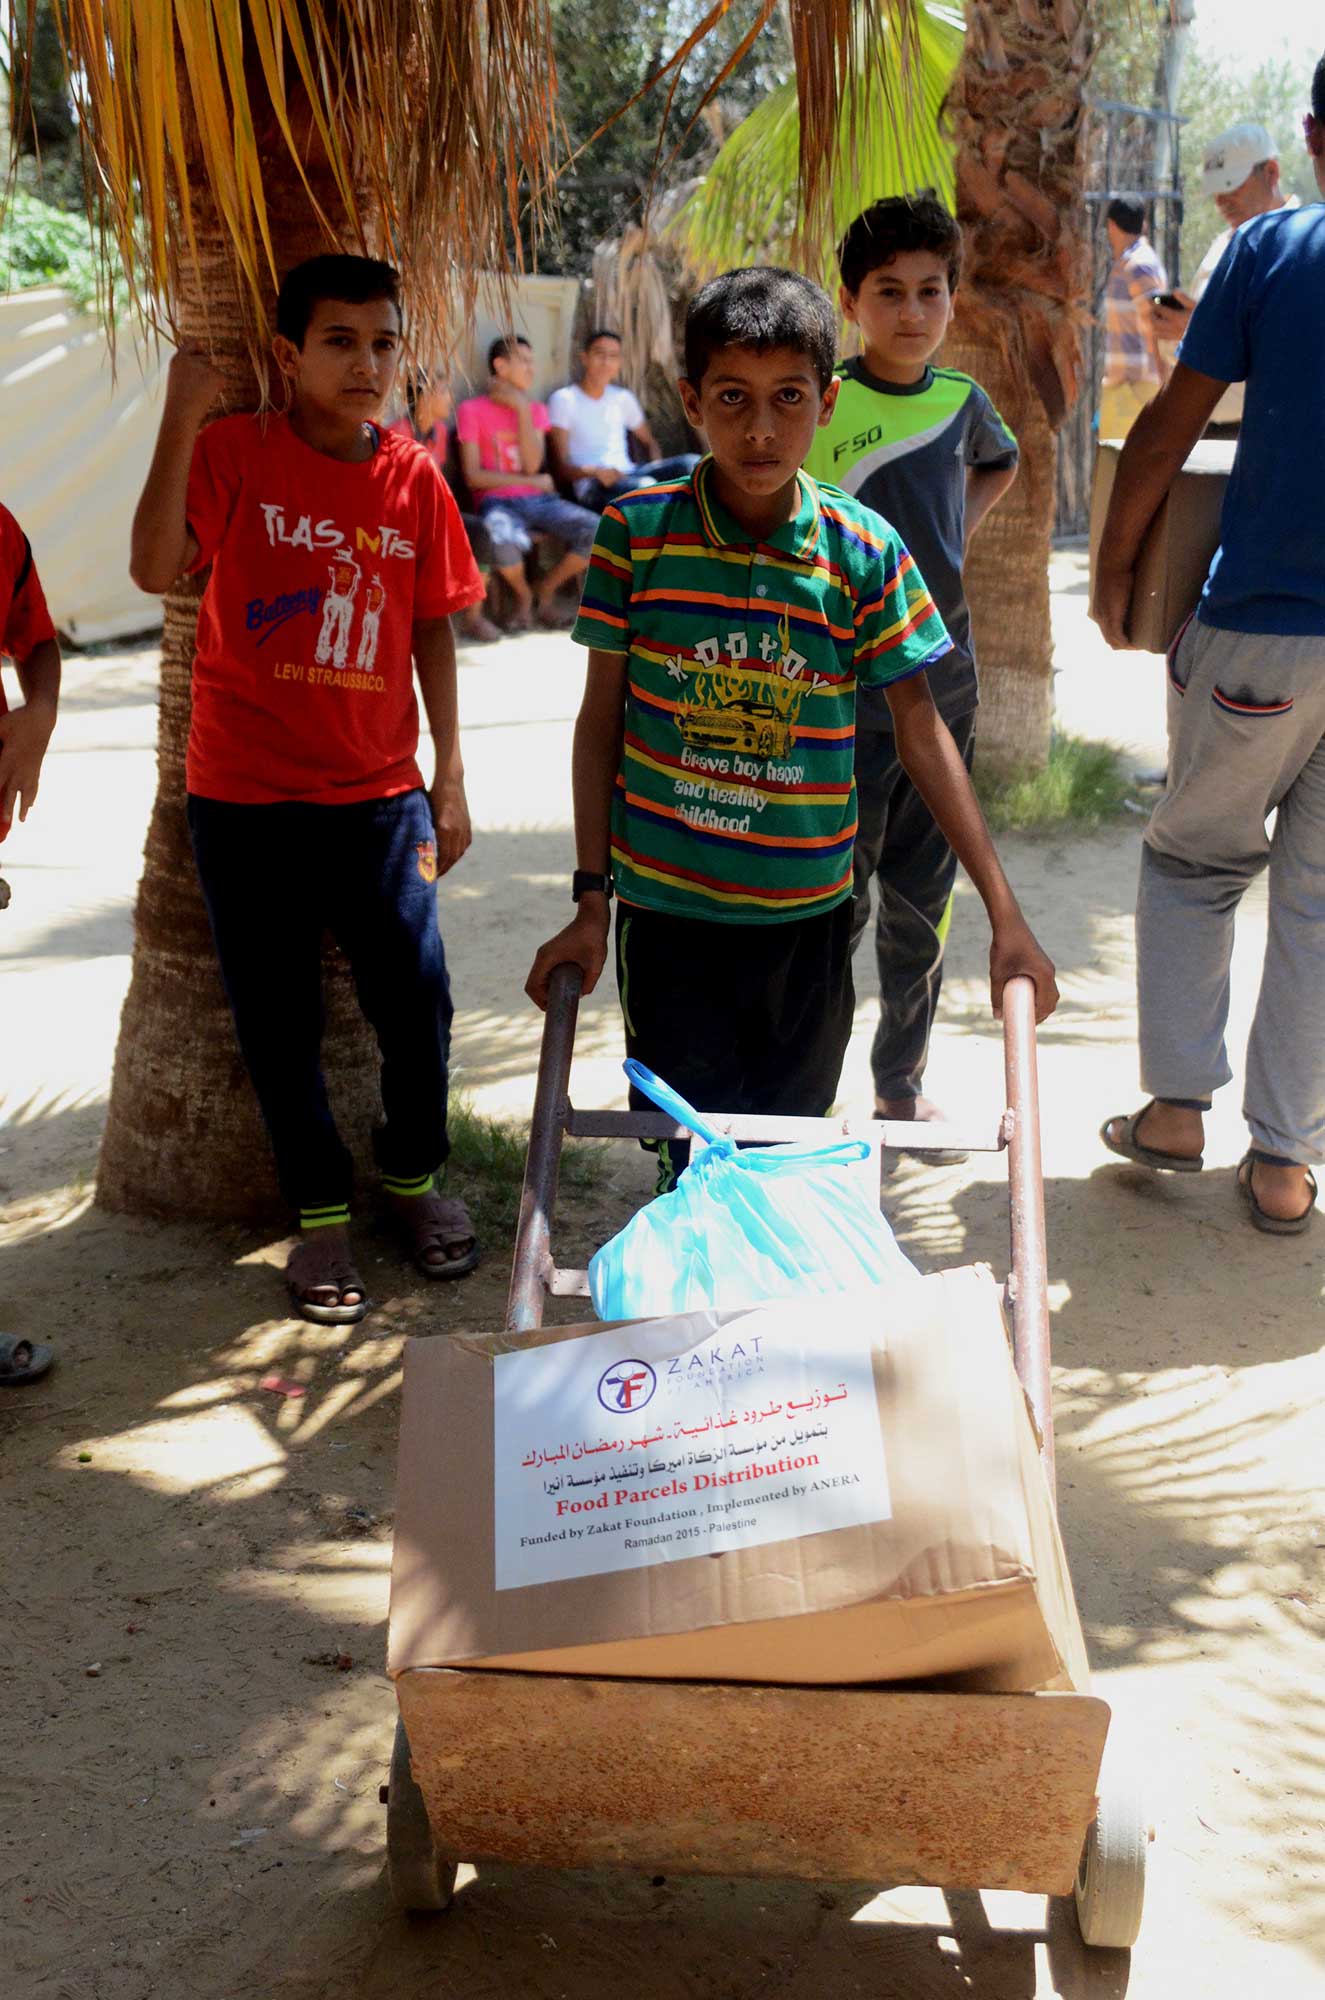 In Deir El Baleh, a young boy brought a hand cart along to help bring the Ramadan gift back to his family.